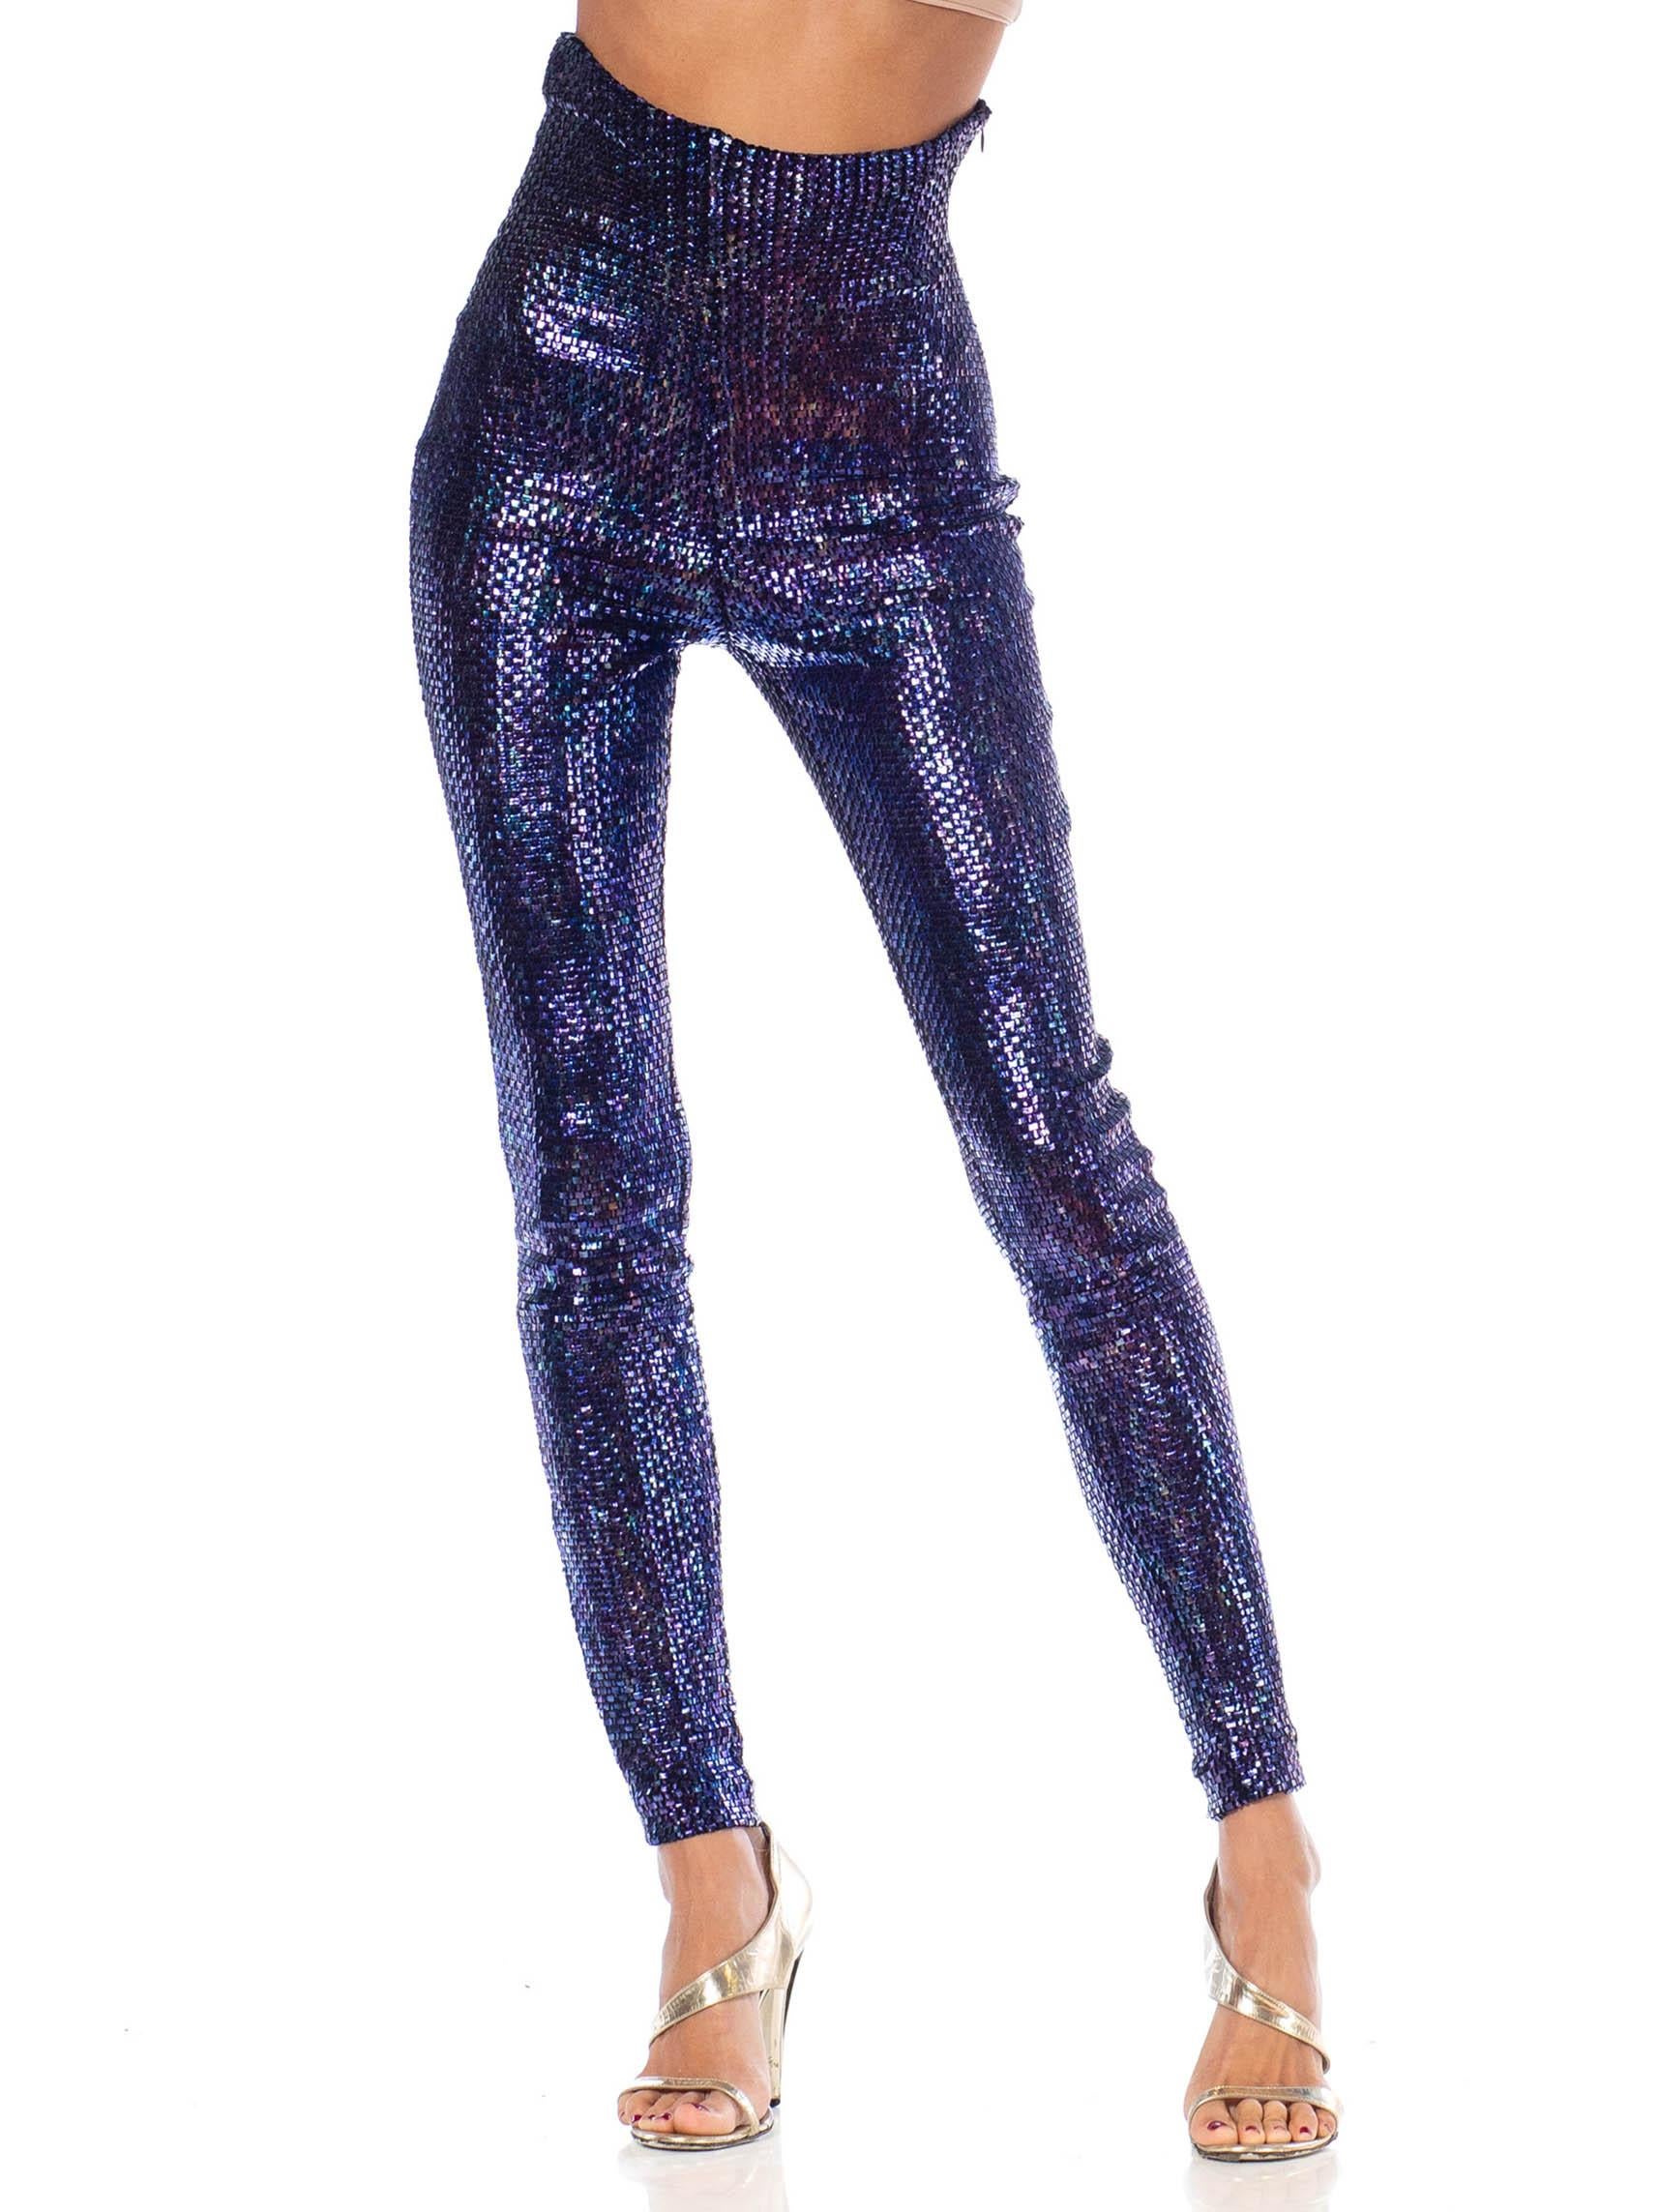 1990S ROMEO GIGLI Purple Viscose & Spandex Fully Sequined High-Waisted Pants For Sale 1